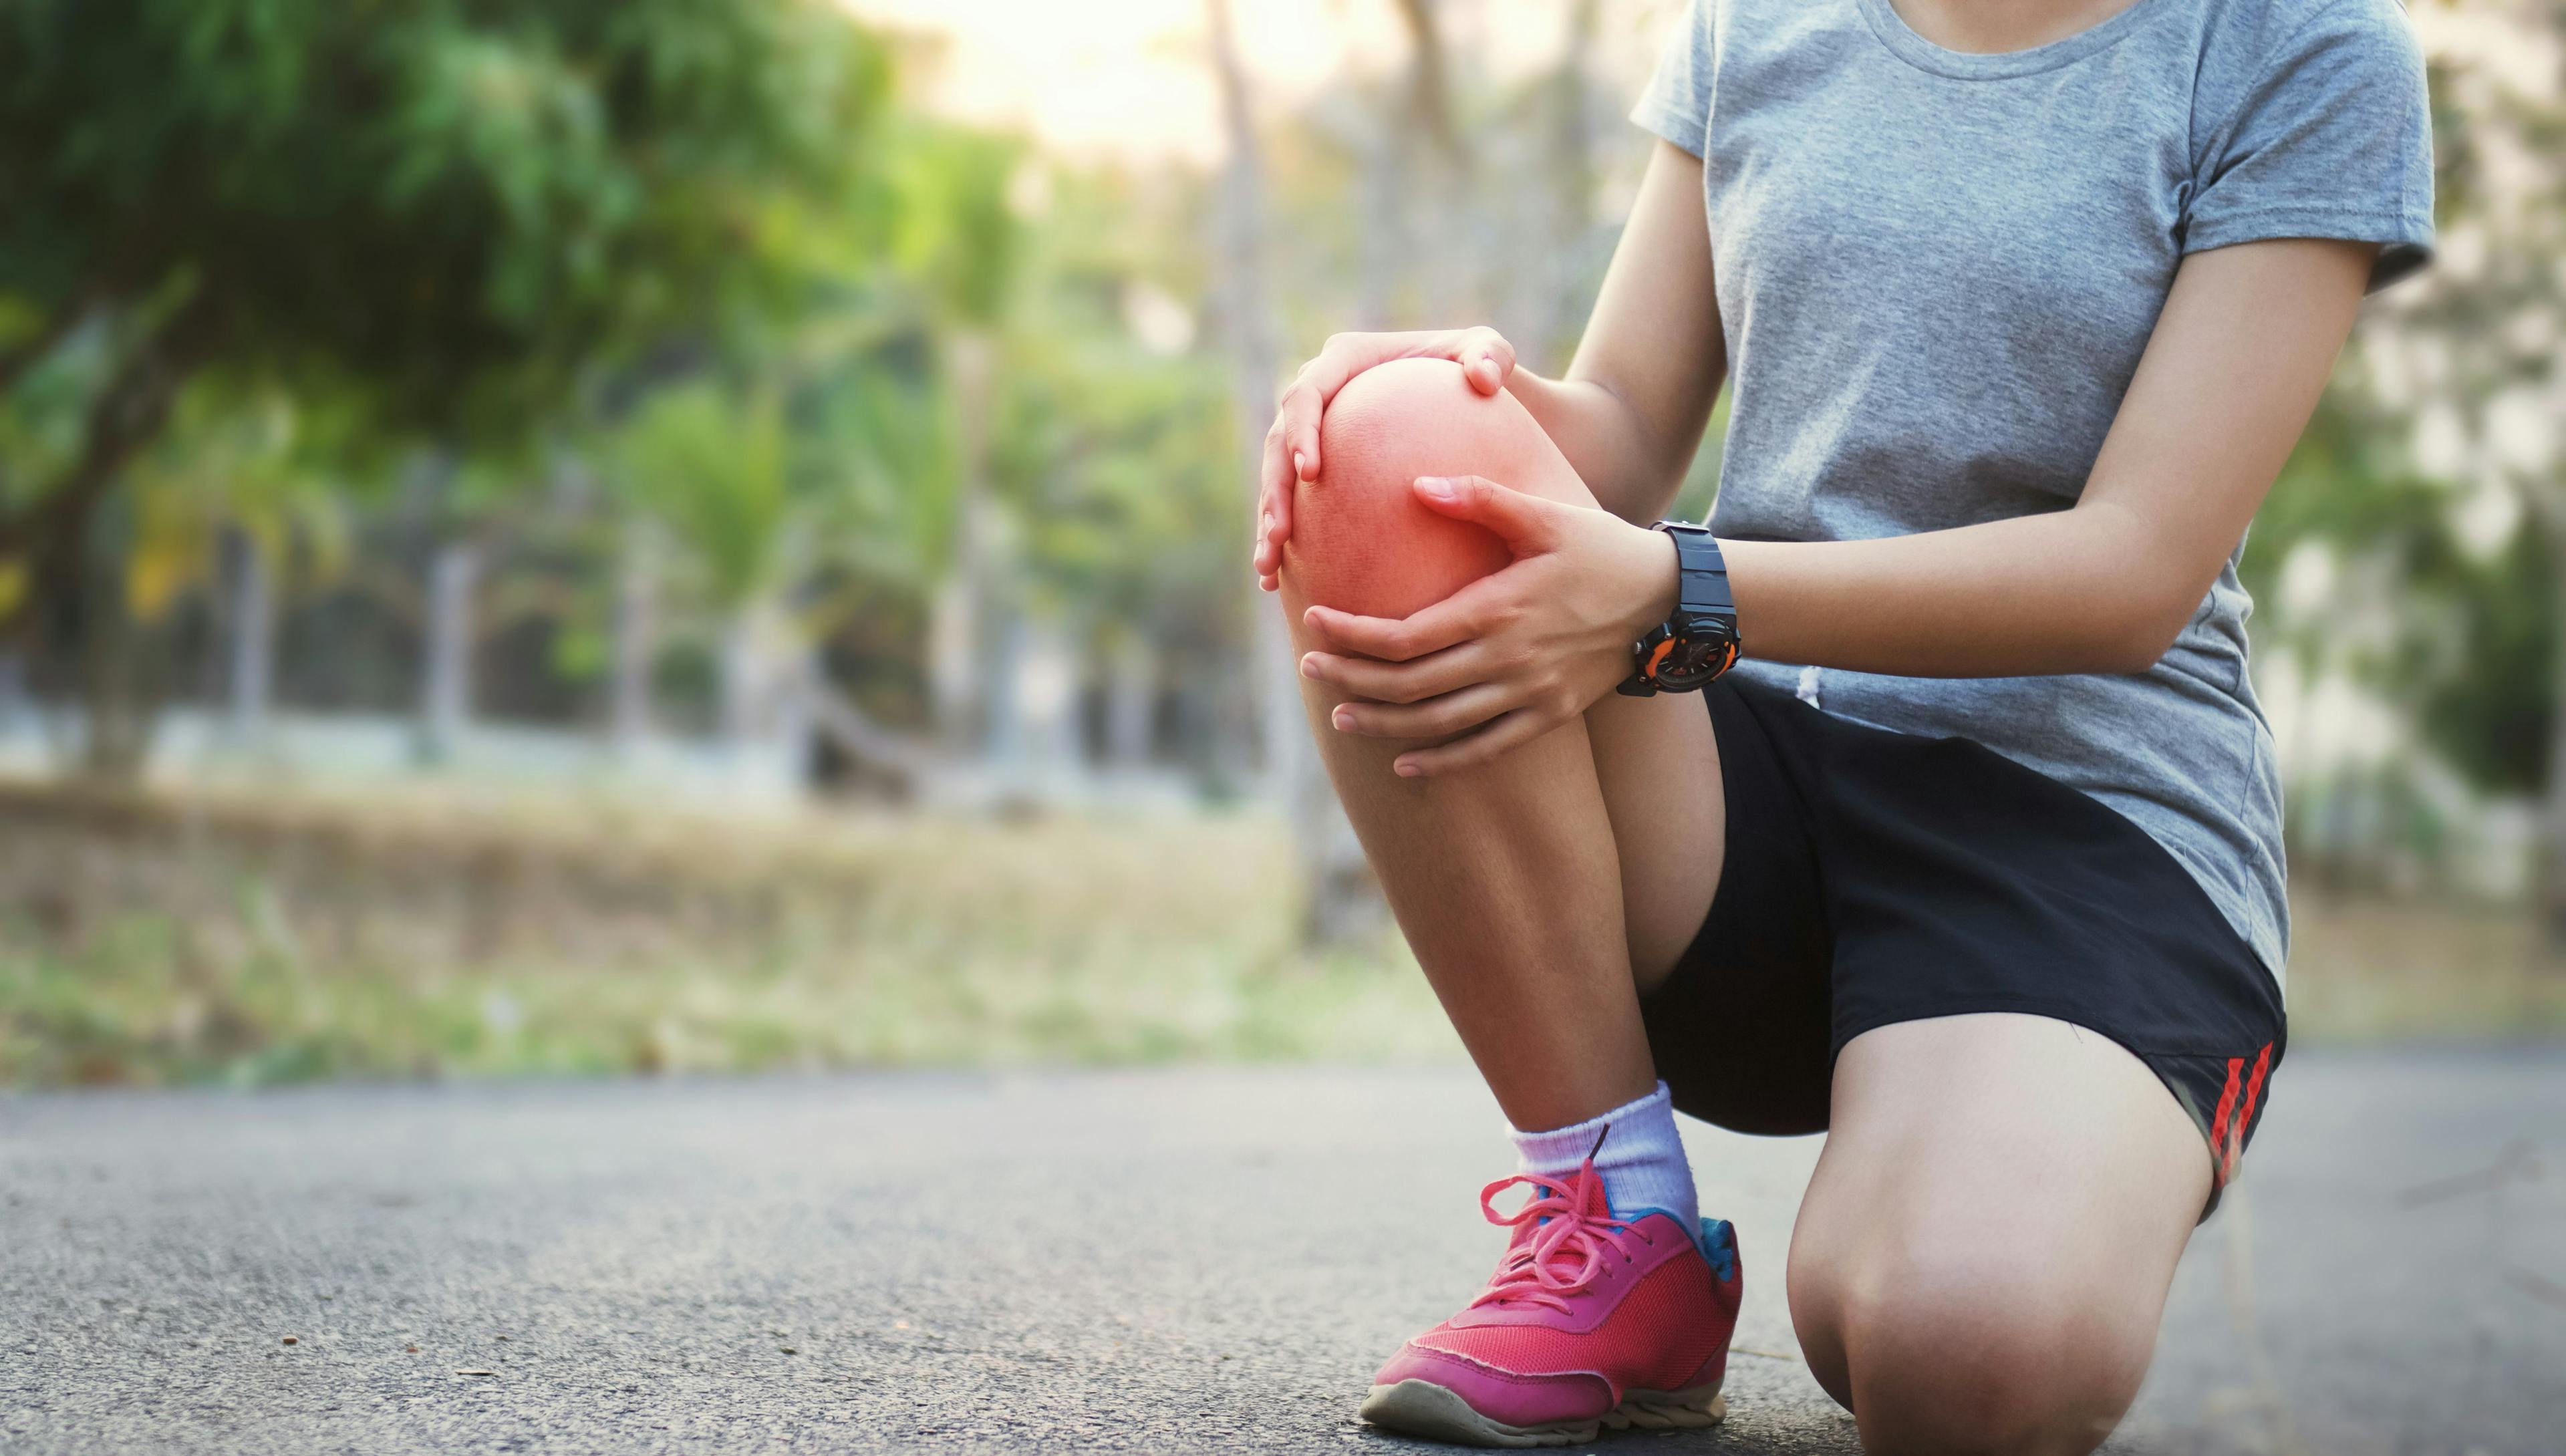 Physical Activity Increases Function in Patients With Knee Osteoarthritis 